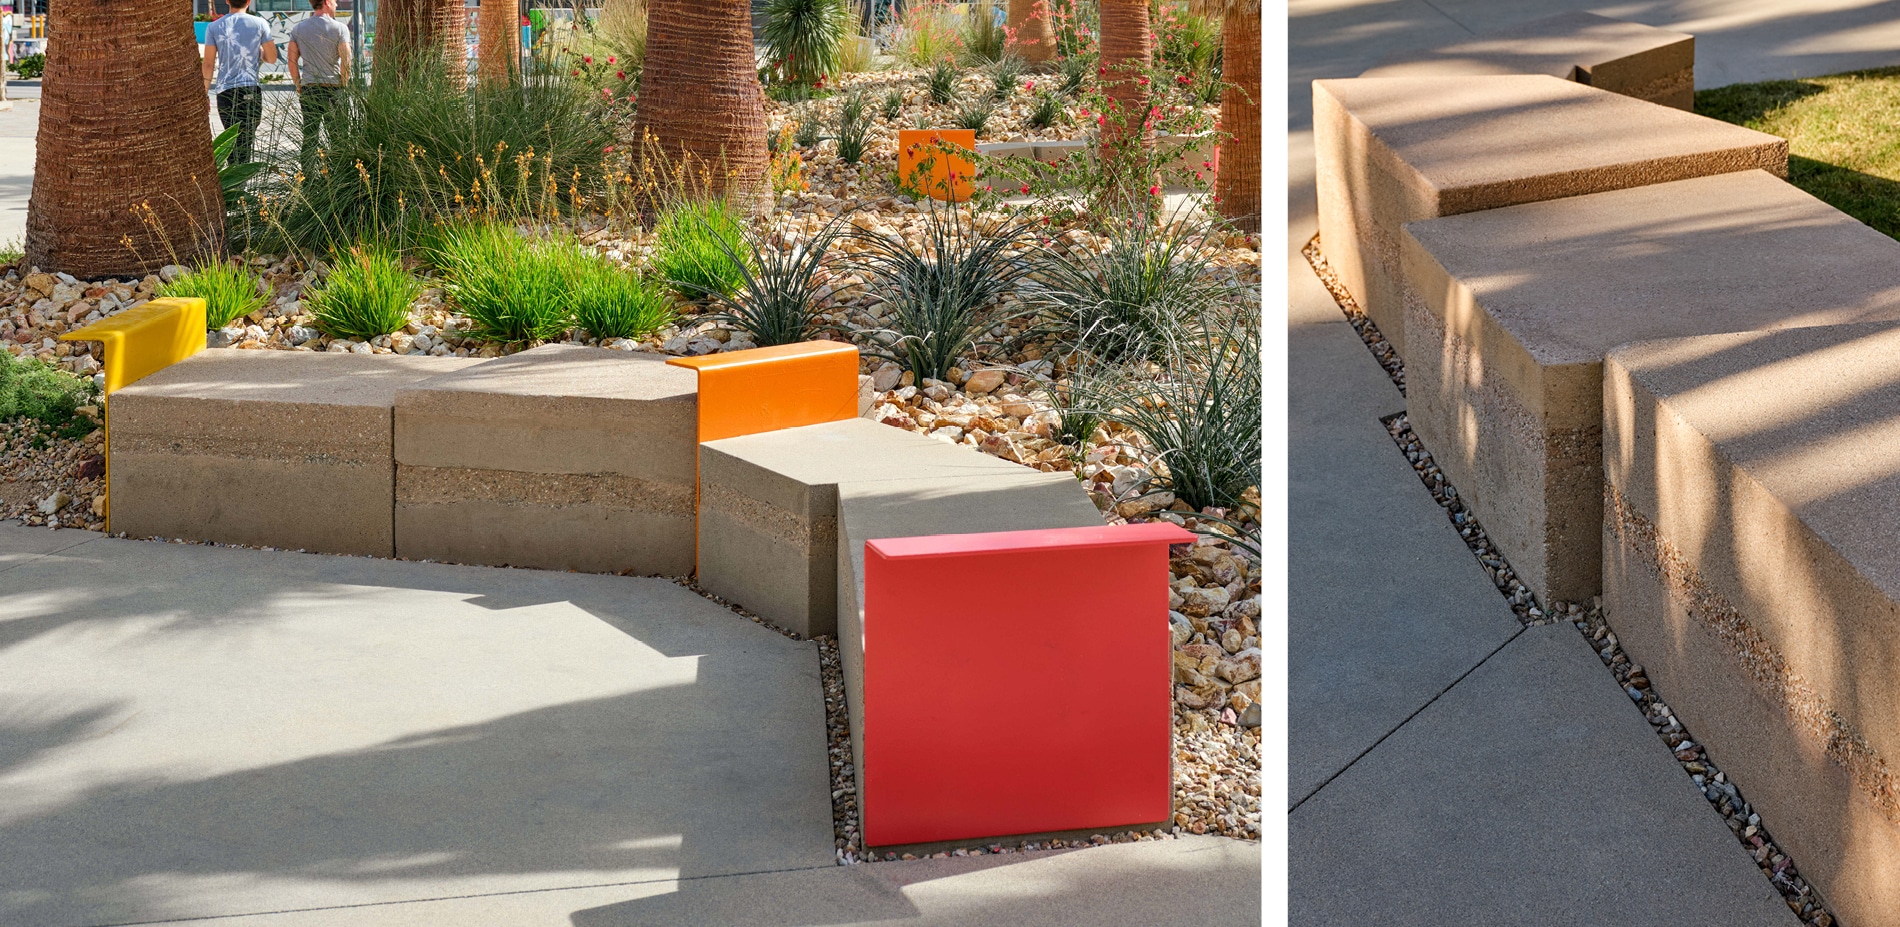 Palm Springs Downtown Park_ASLA 2022 Professional Awards_General Design_benches